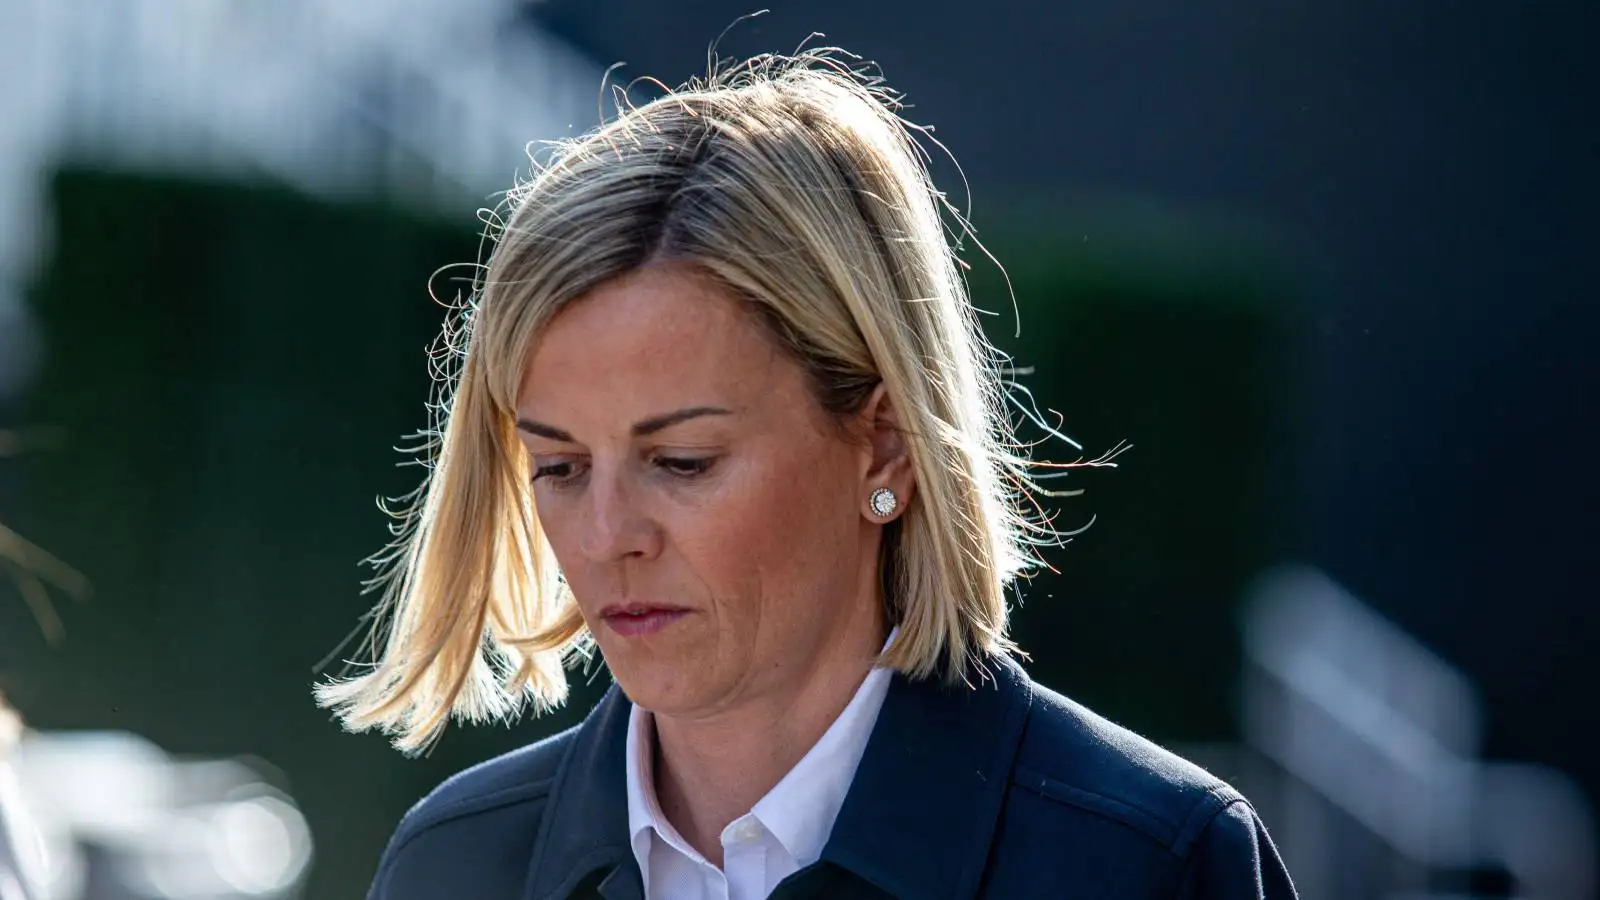 F1 Academy managing director Susie Wolff in the F1 paddock at the 2023 United States Grand Prix.